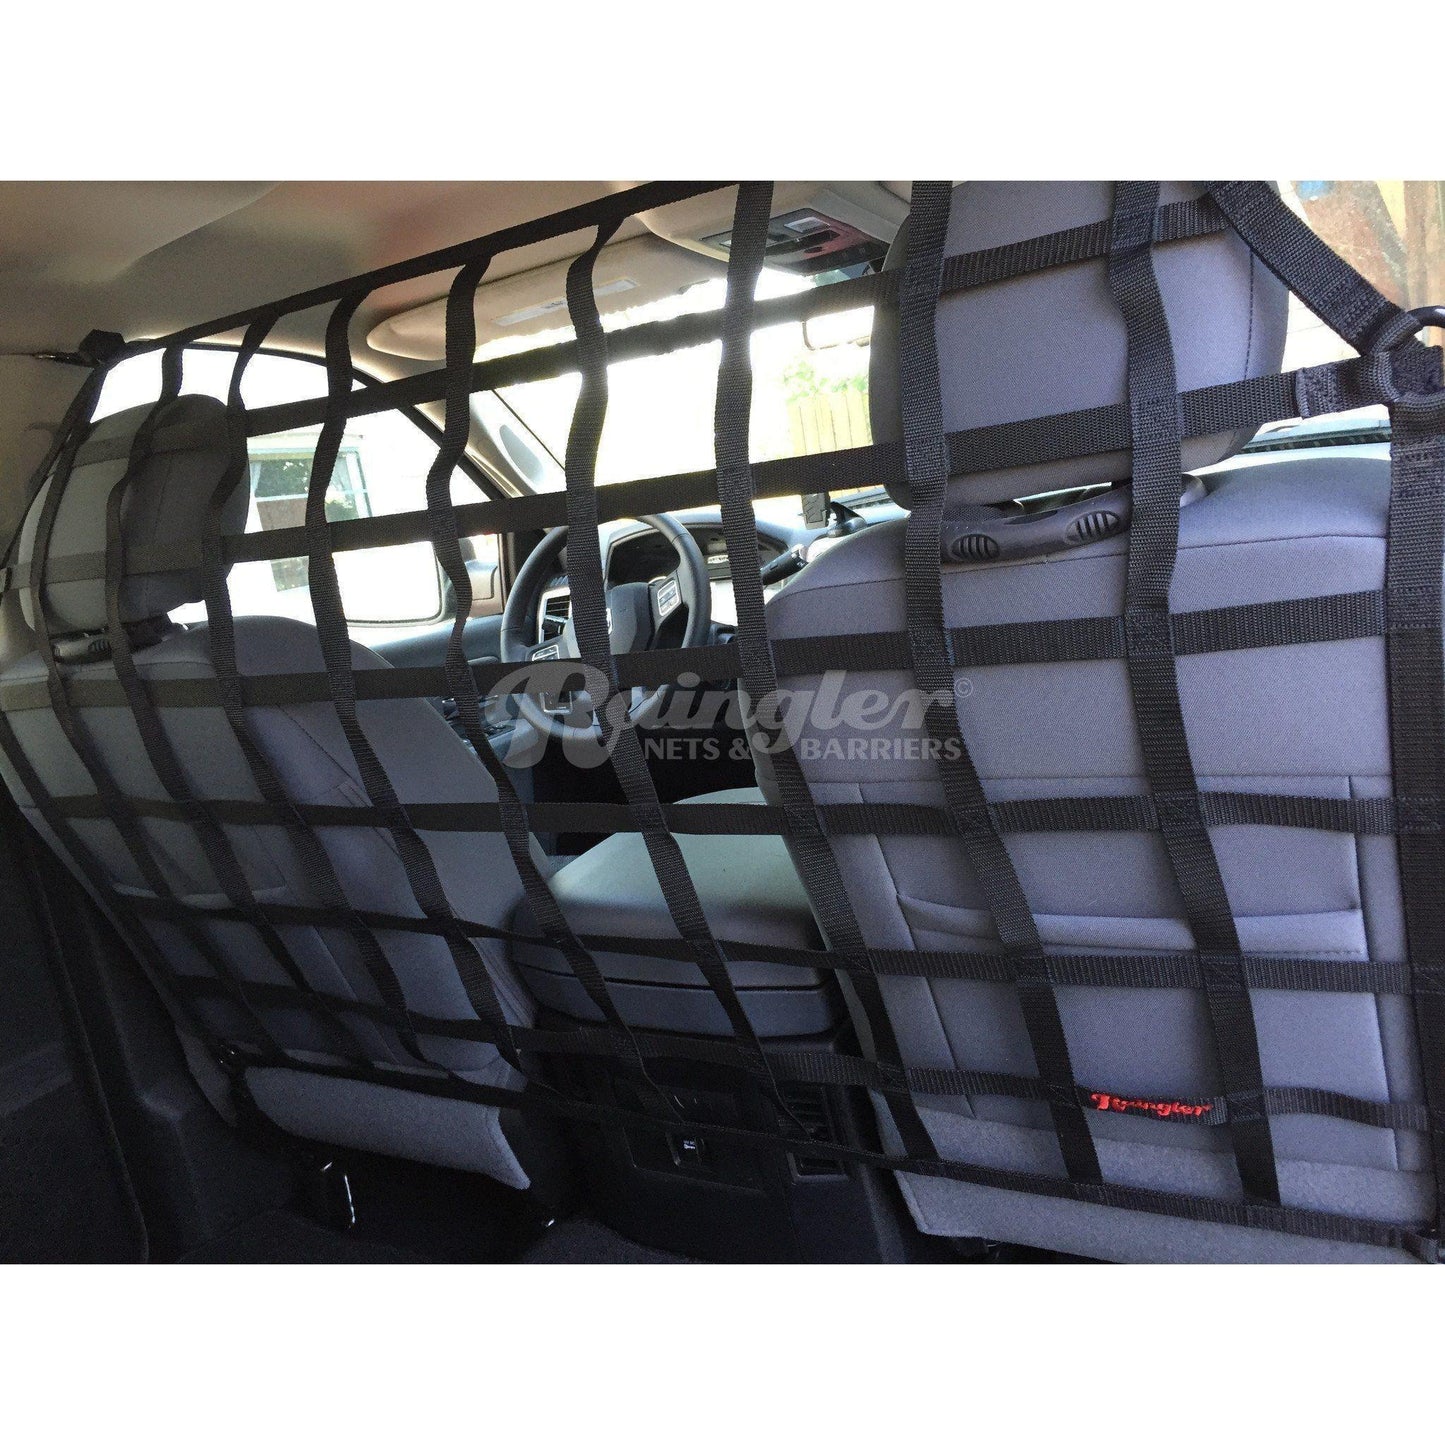 2000 - 2006 Ford Excursion Behind Front Seats Barrier Divider Net